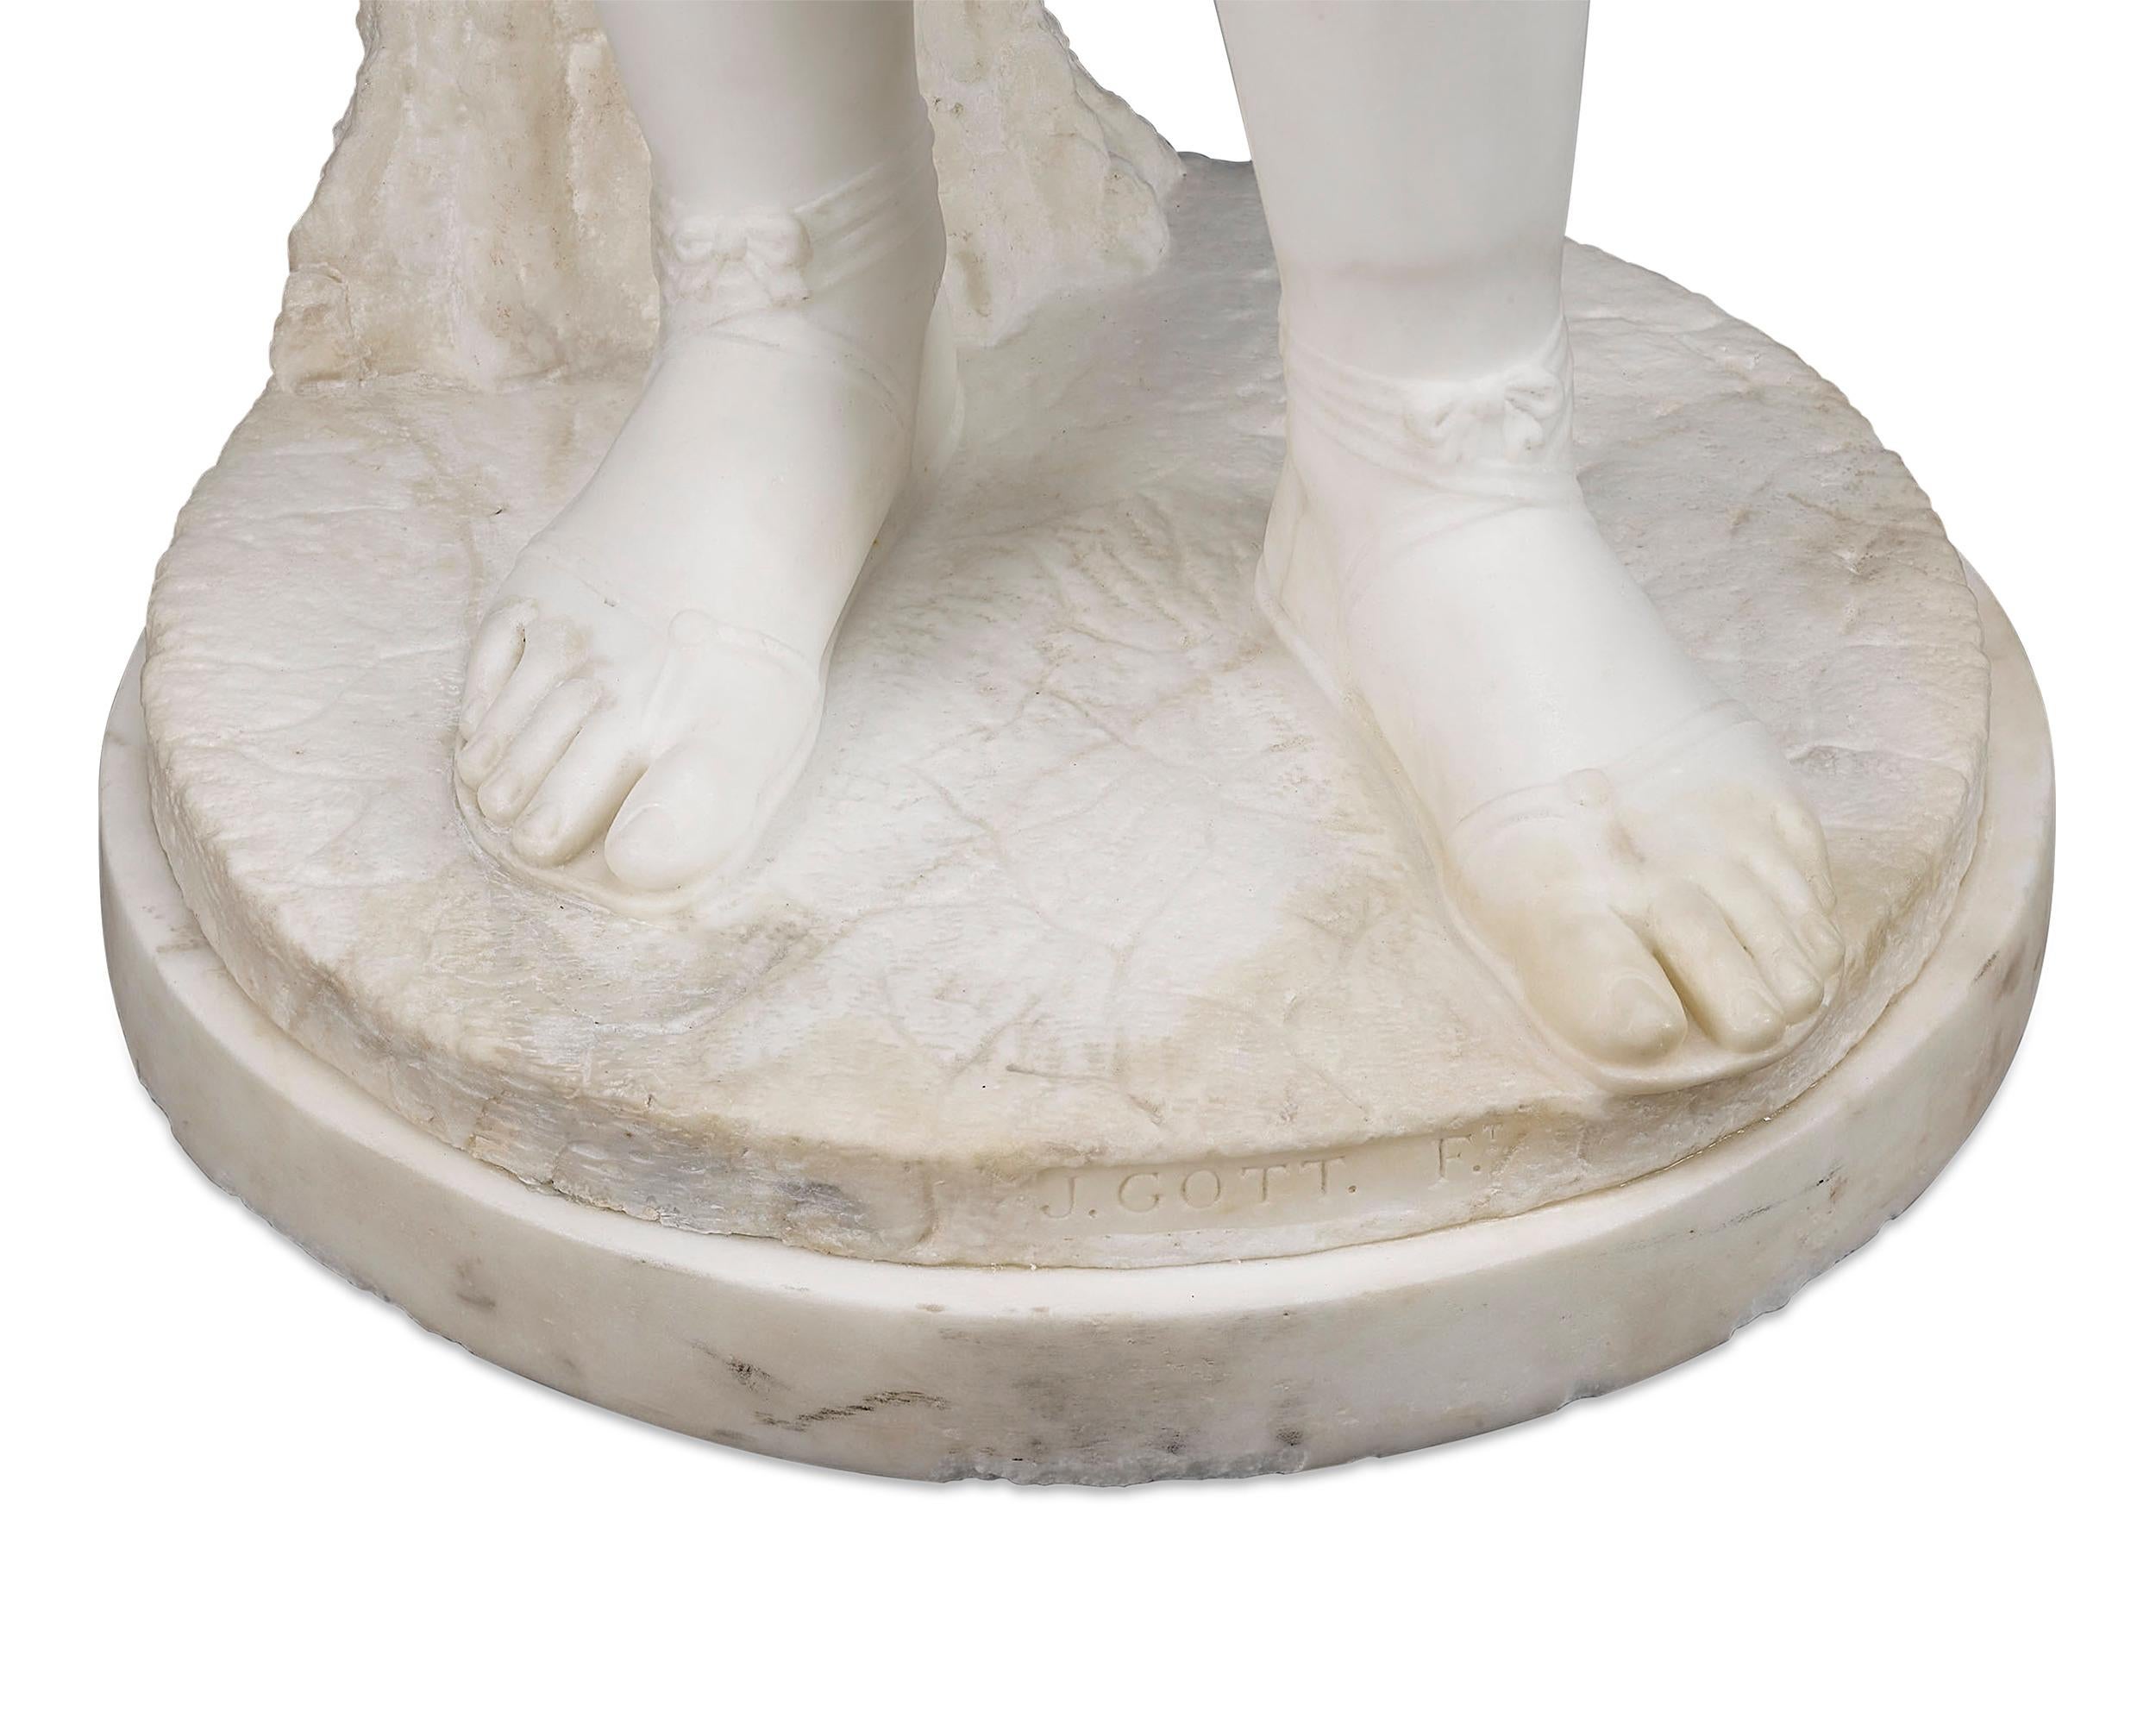 White marble, set on a shallow white marble plinth
Signed “J. Gott, Ft.”

Known for his unconventional, almost light-hearted, approach to his subjects, Joseph Gott offers his own interpretation of the character of Little Red Riding Hood in this